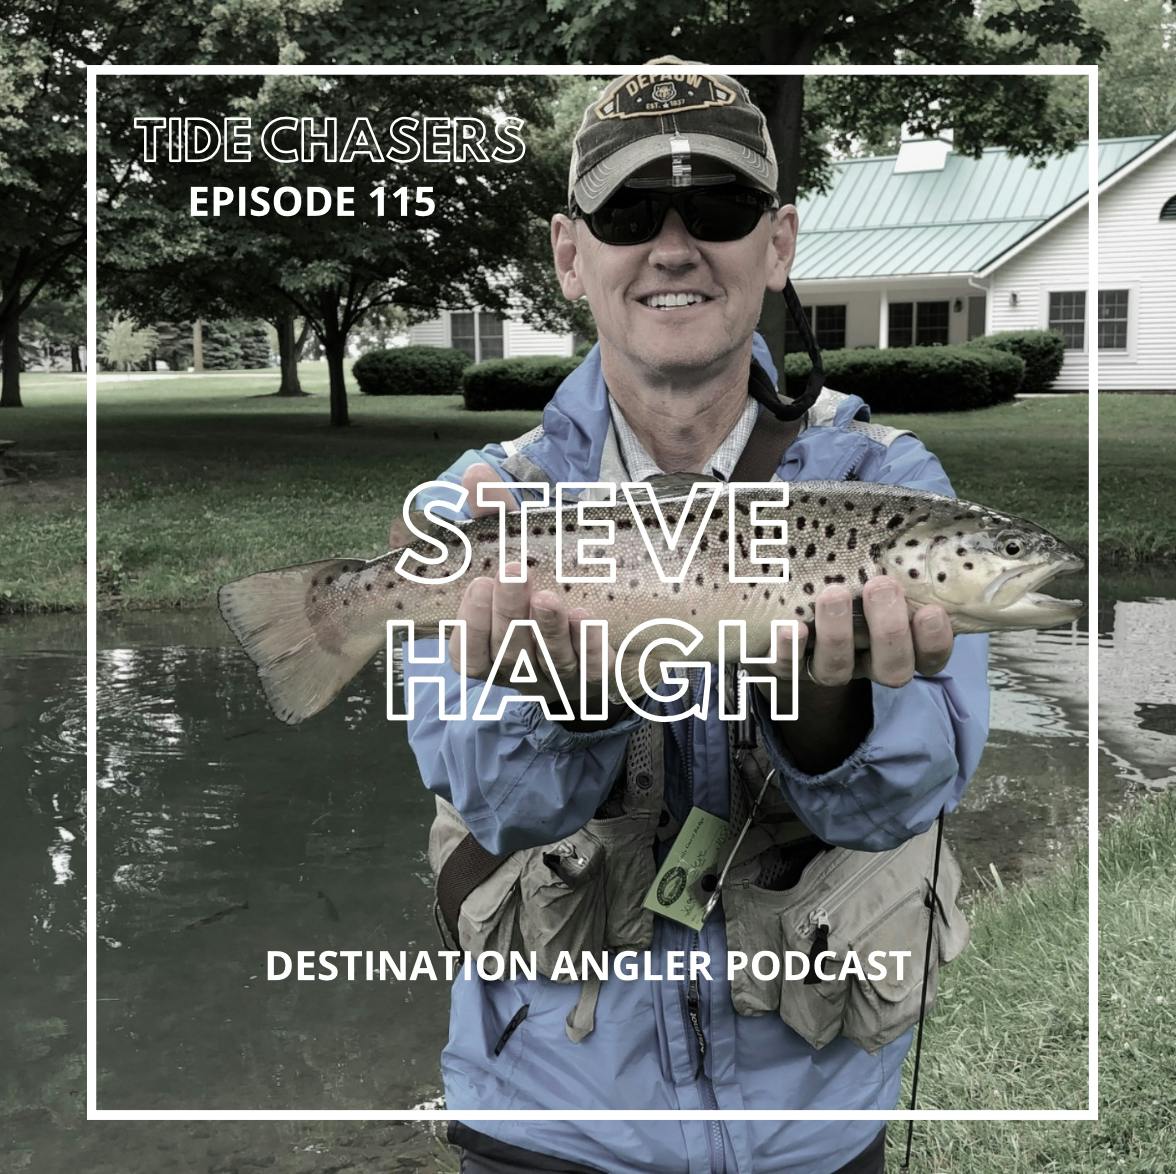 Episode 115 : Behind the scenes of Destination Angler Podcast with Steve Haigh